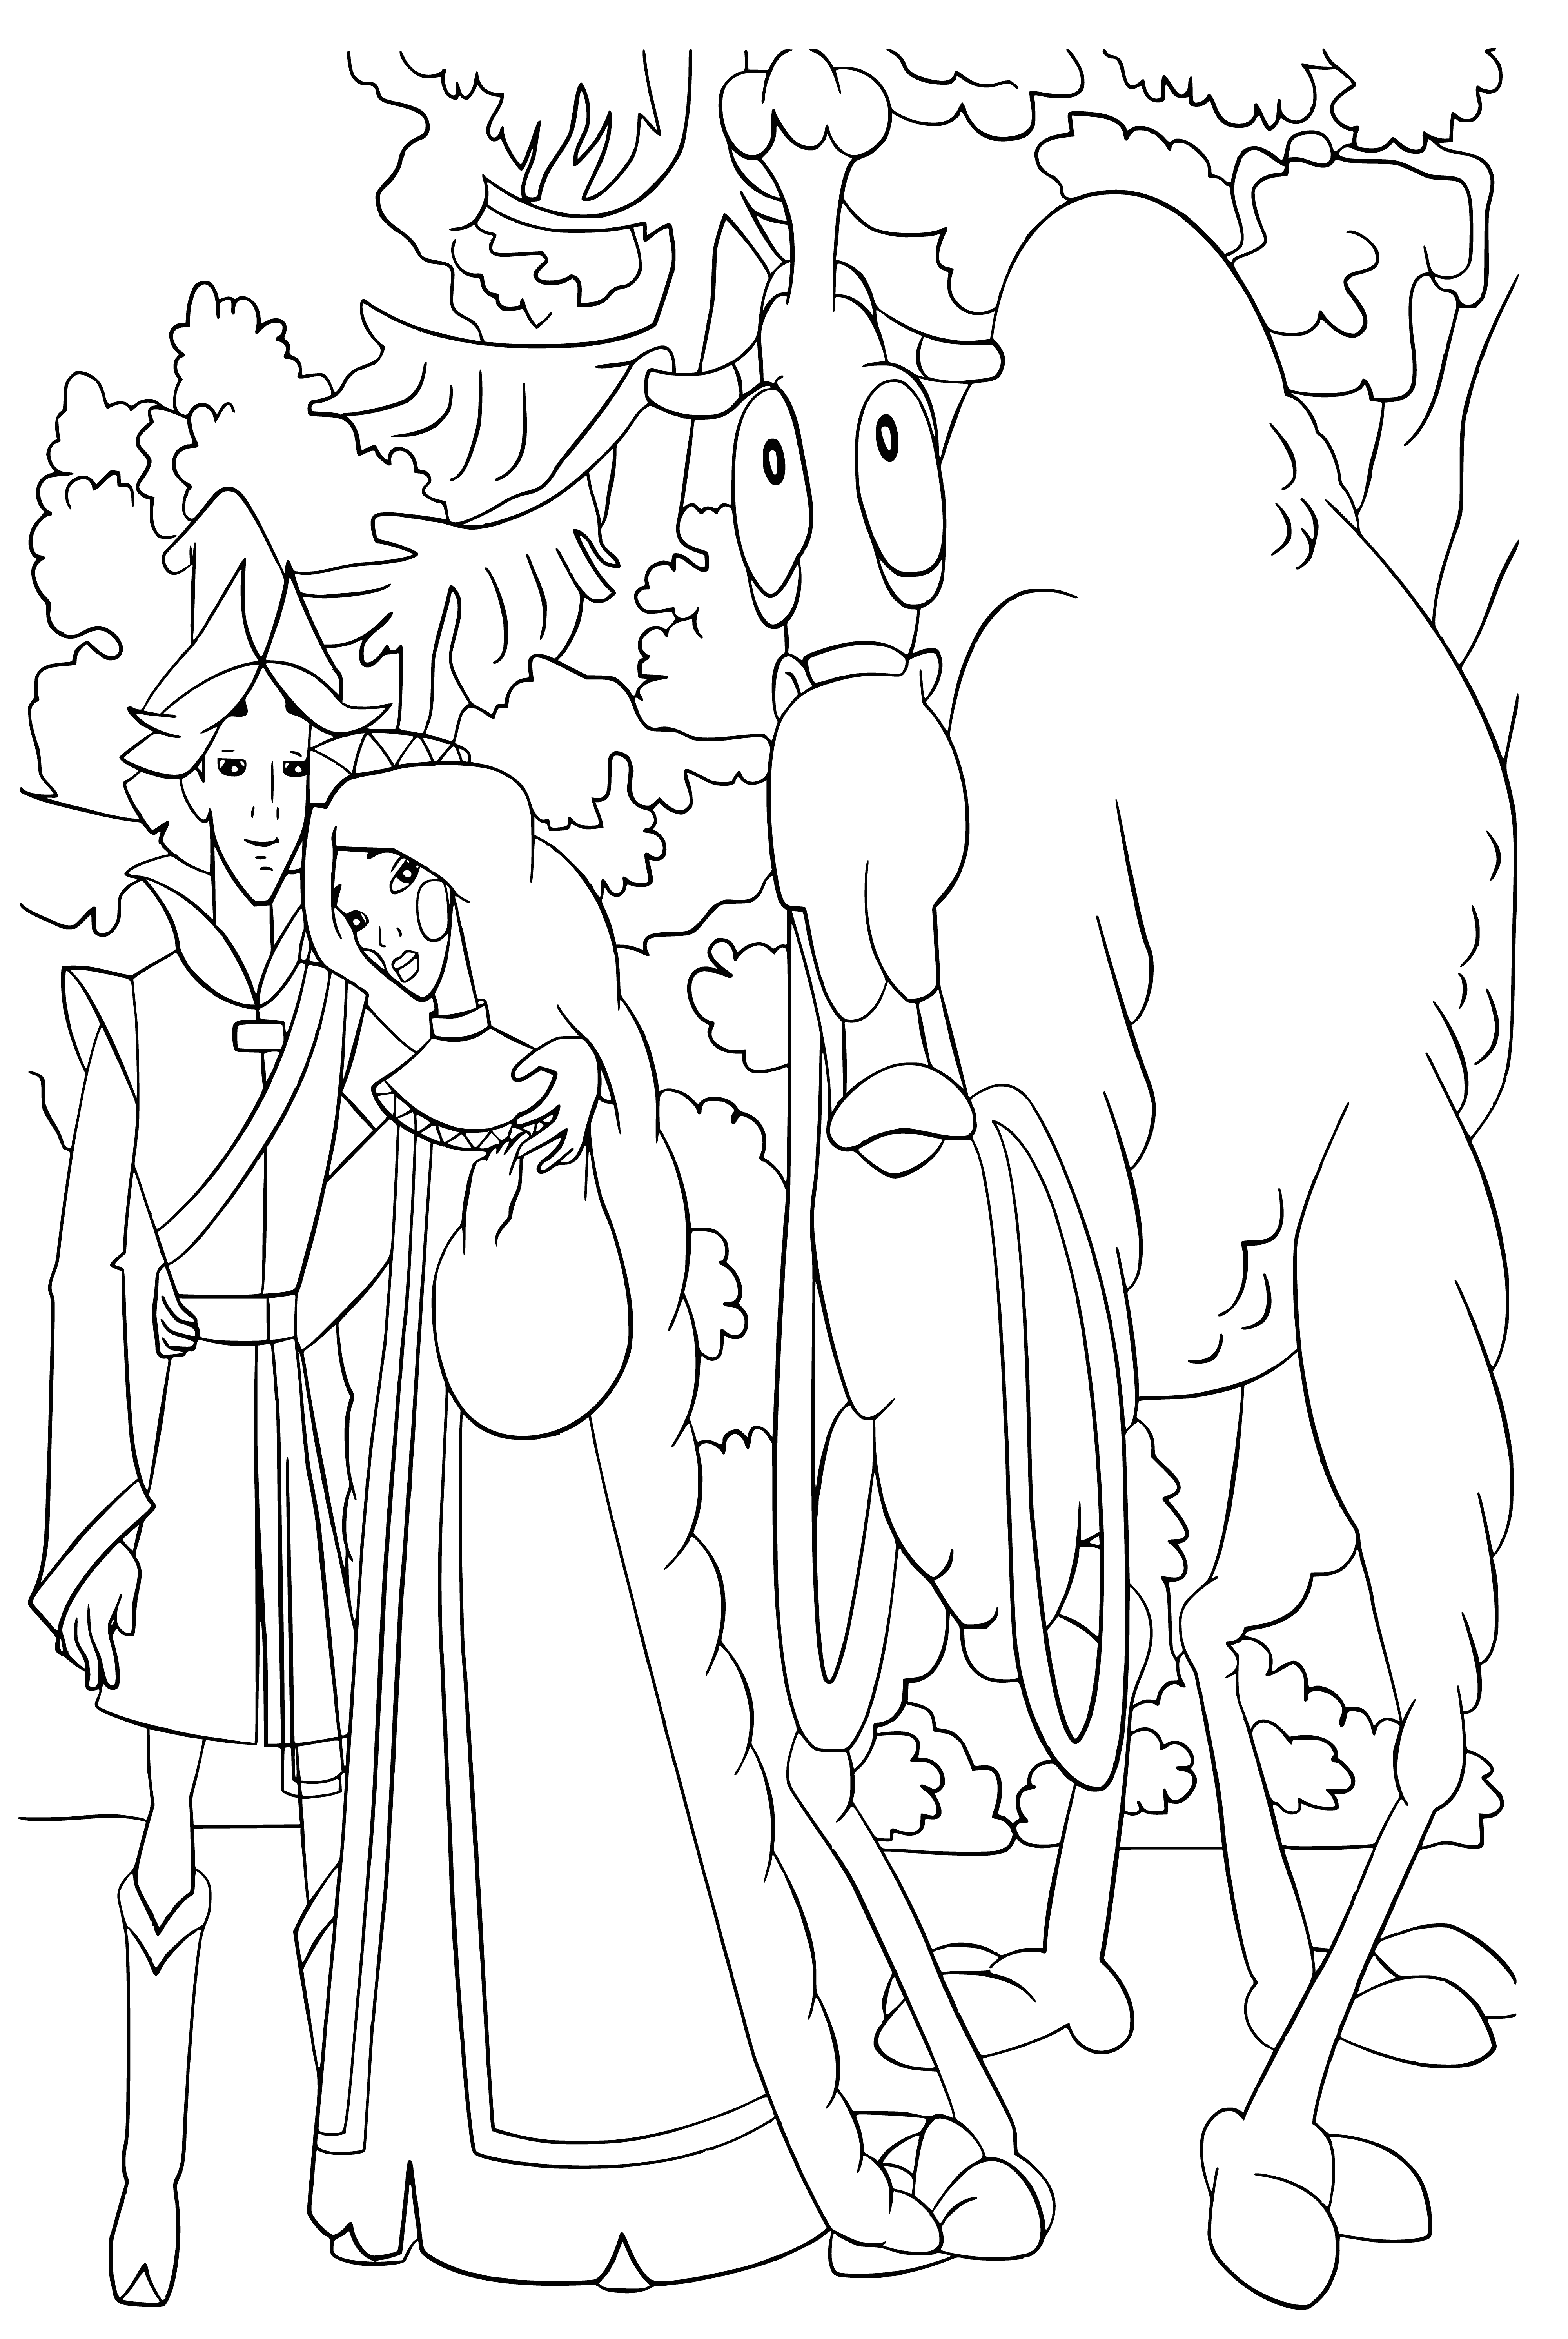 coloring page: Dobrynya Nikitich rides horse, holding spear, with 6-headed serpent & castle behind & 3 white birds in sky.